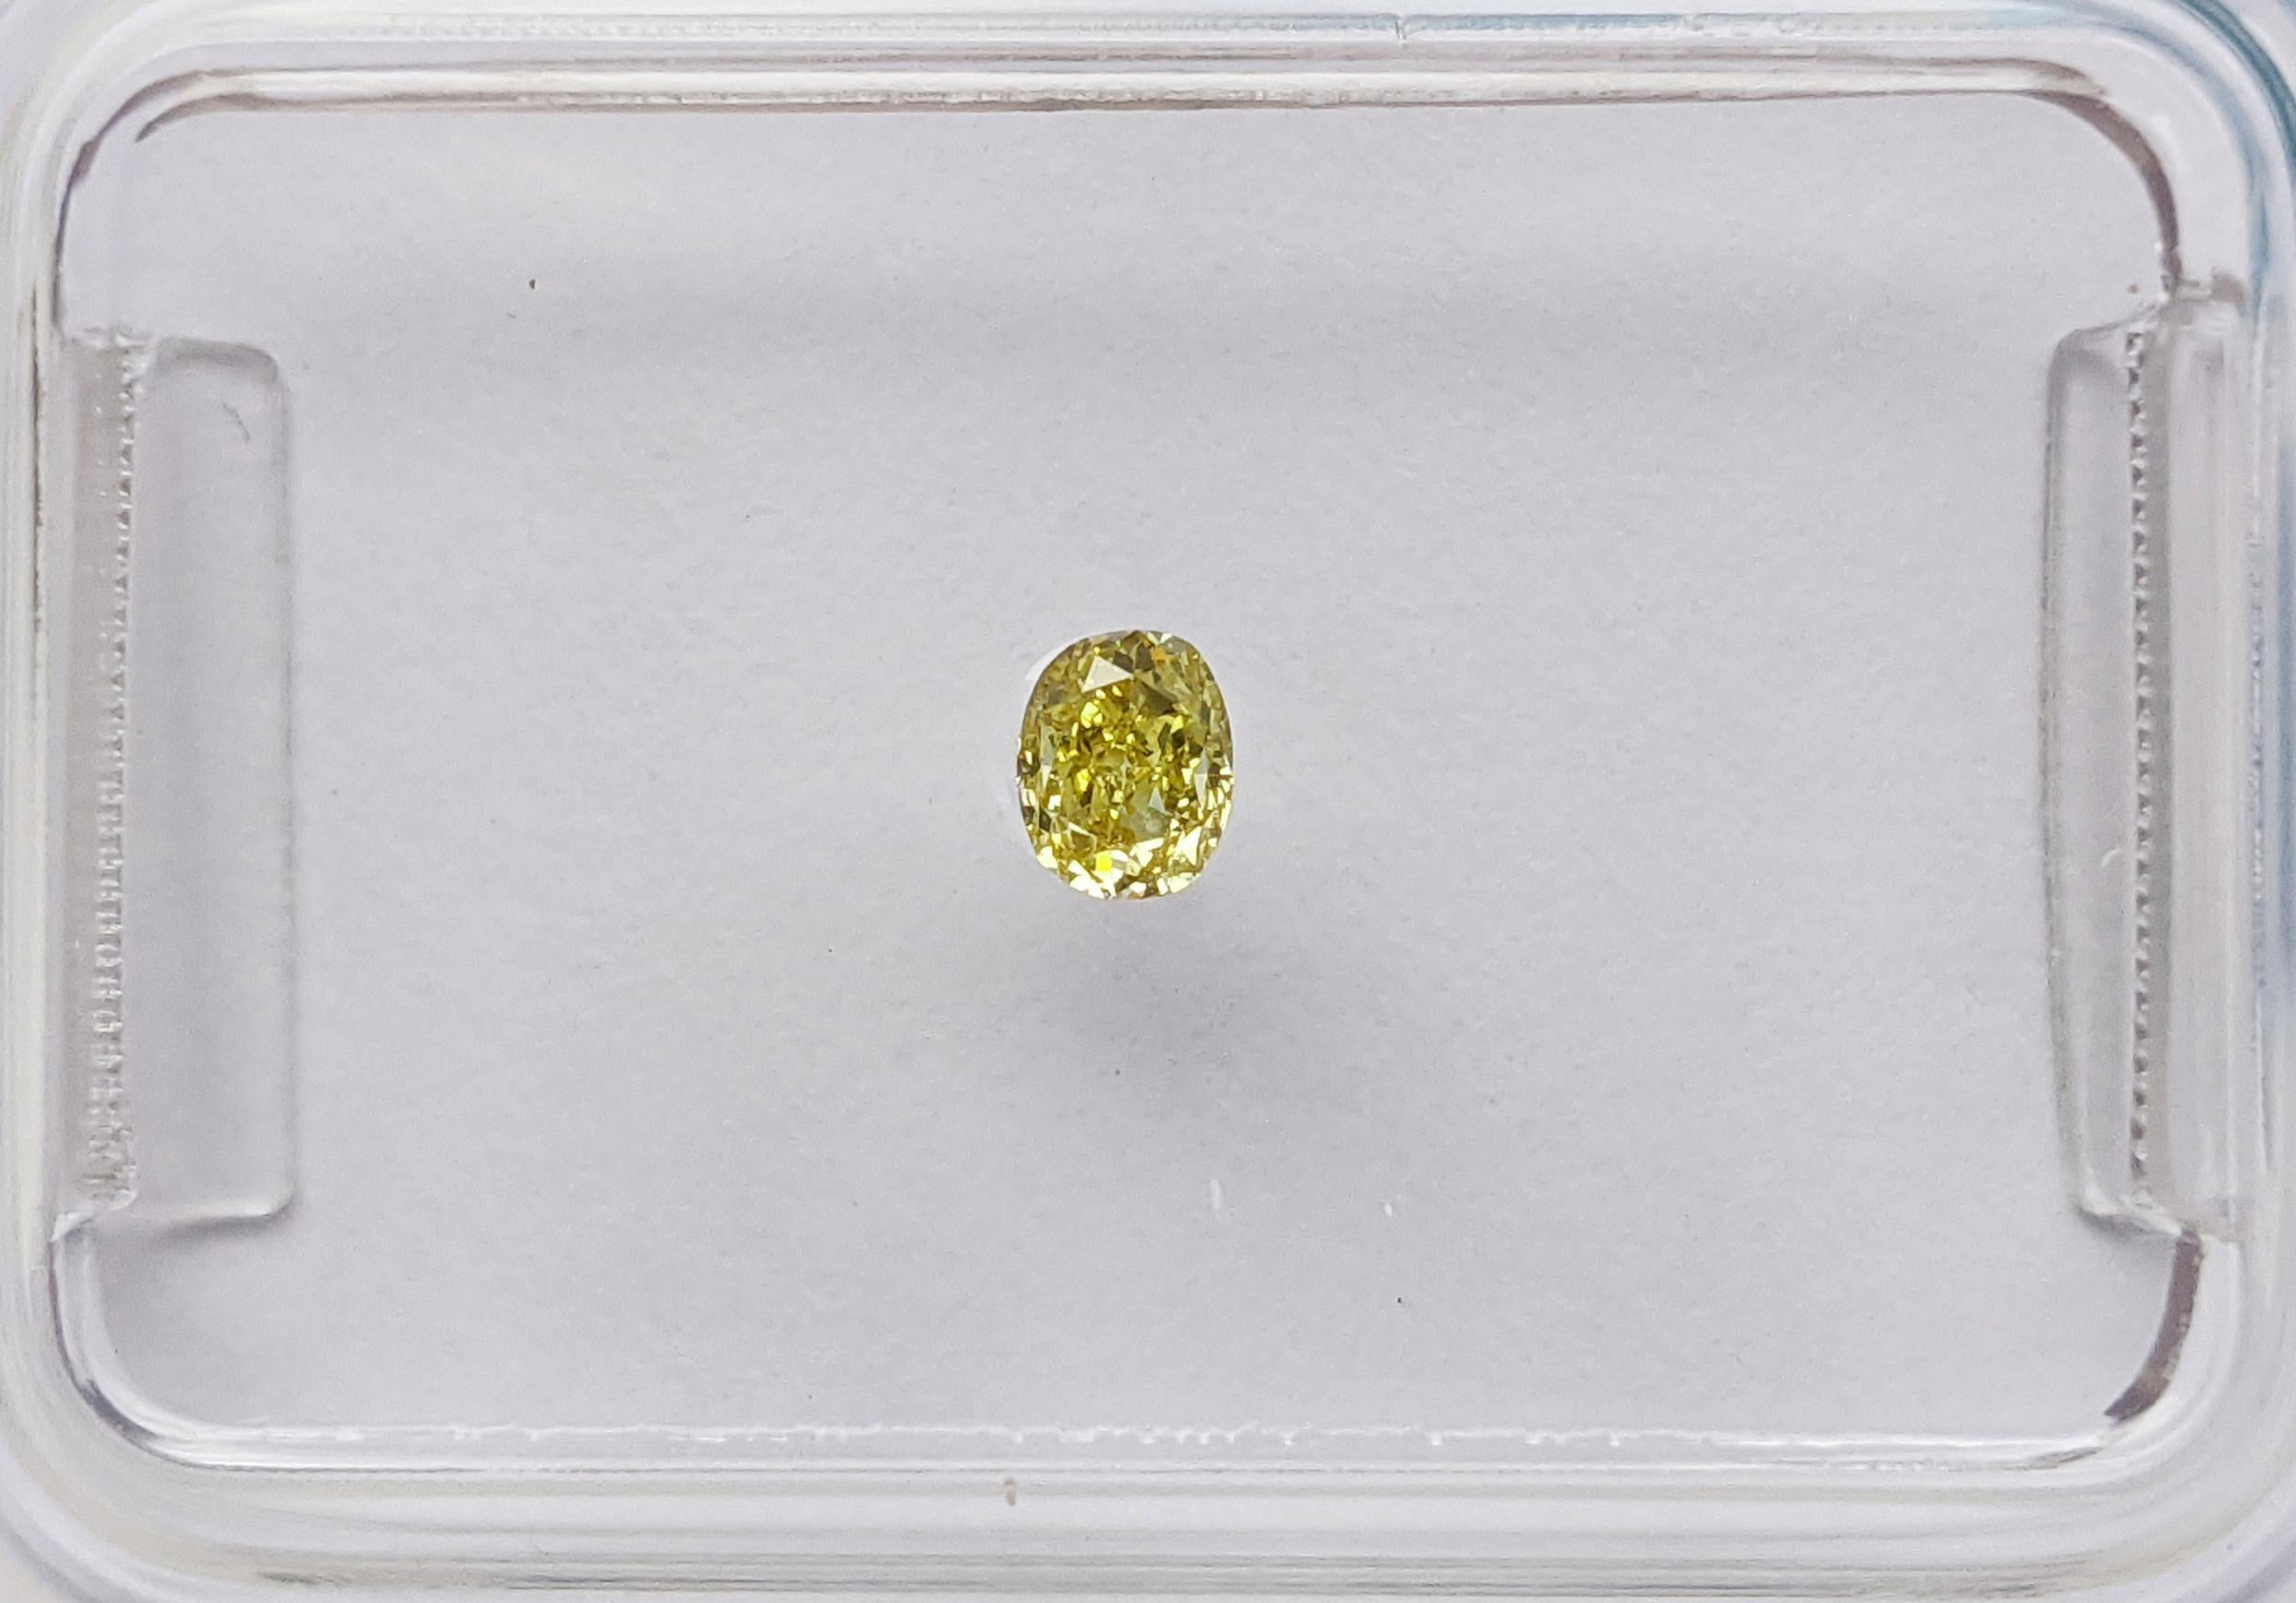 Here's an exquisite 0.11ct Oval Modified Brilliant diamond, certified by IGI. Its mesmerizing Fancy Vivid Greyish Yellow hue is a rare delight, exuding sophistication. With a reliable VS2 clarity, this diamond captures attention with both beauty and